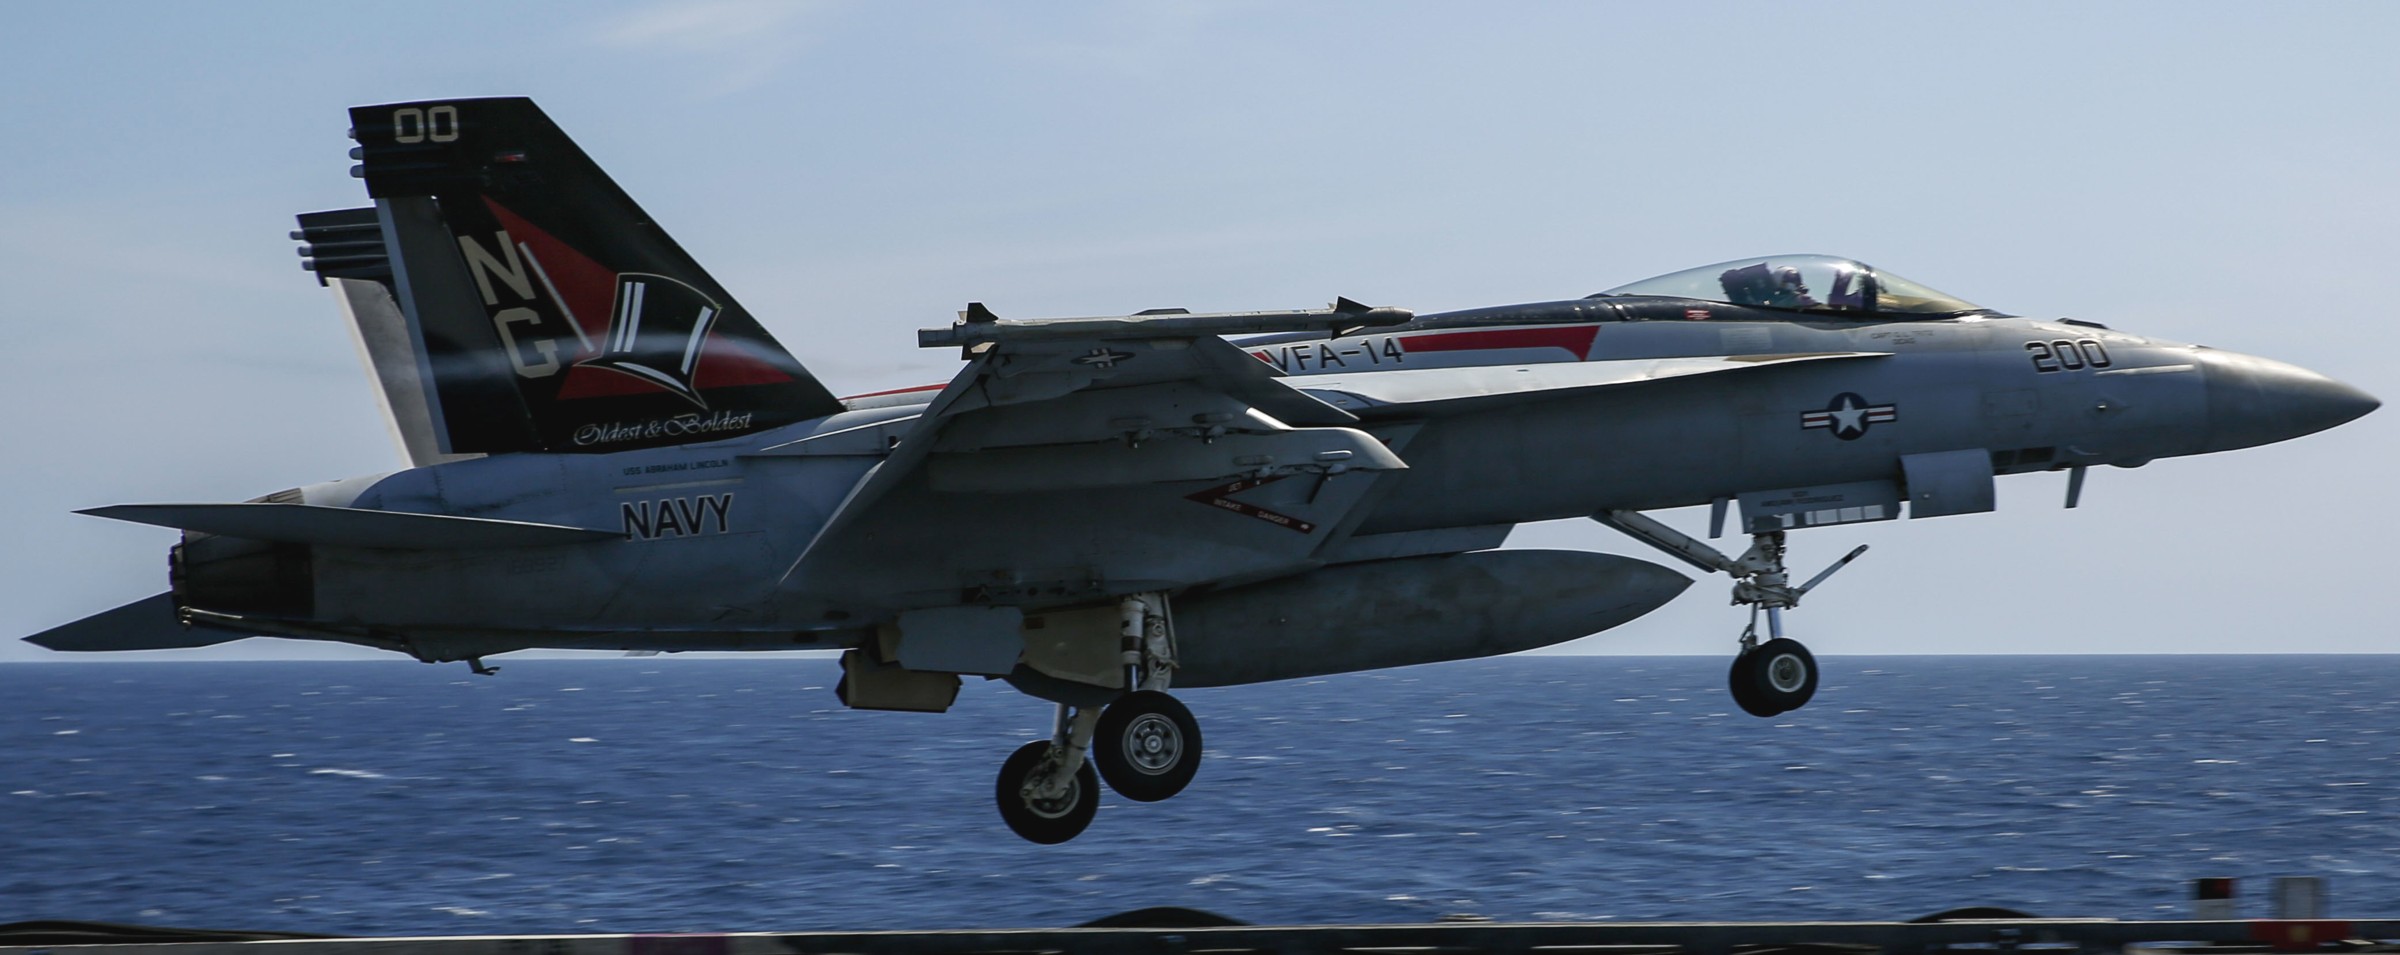 vfa-14 tophatters strike fighter squadron f/a-18e super hornet cvn-72 uss abraham lincoln cvw-9 us navy 83